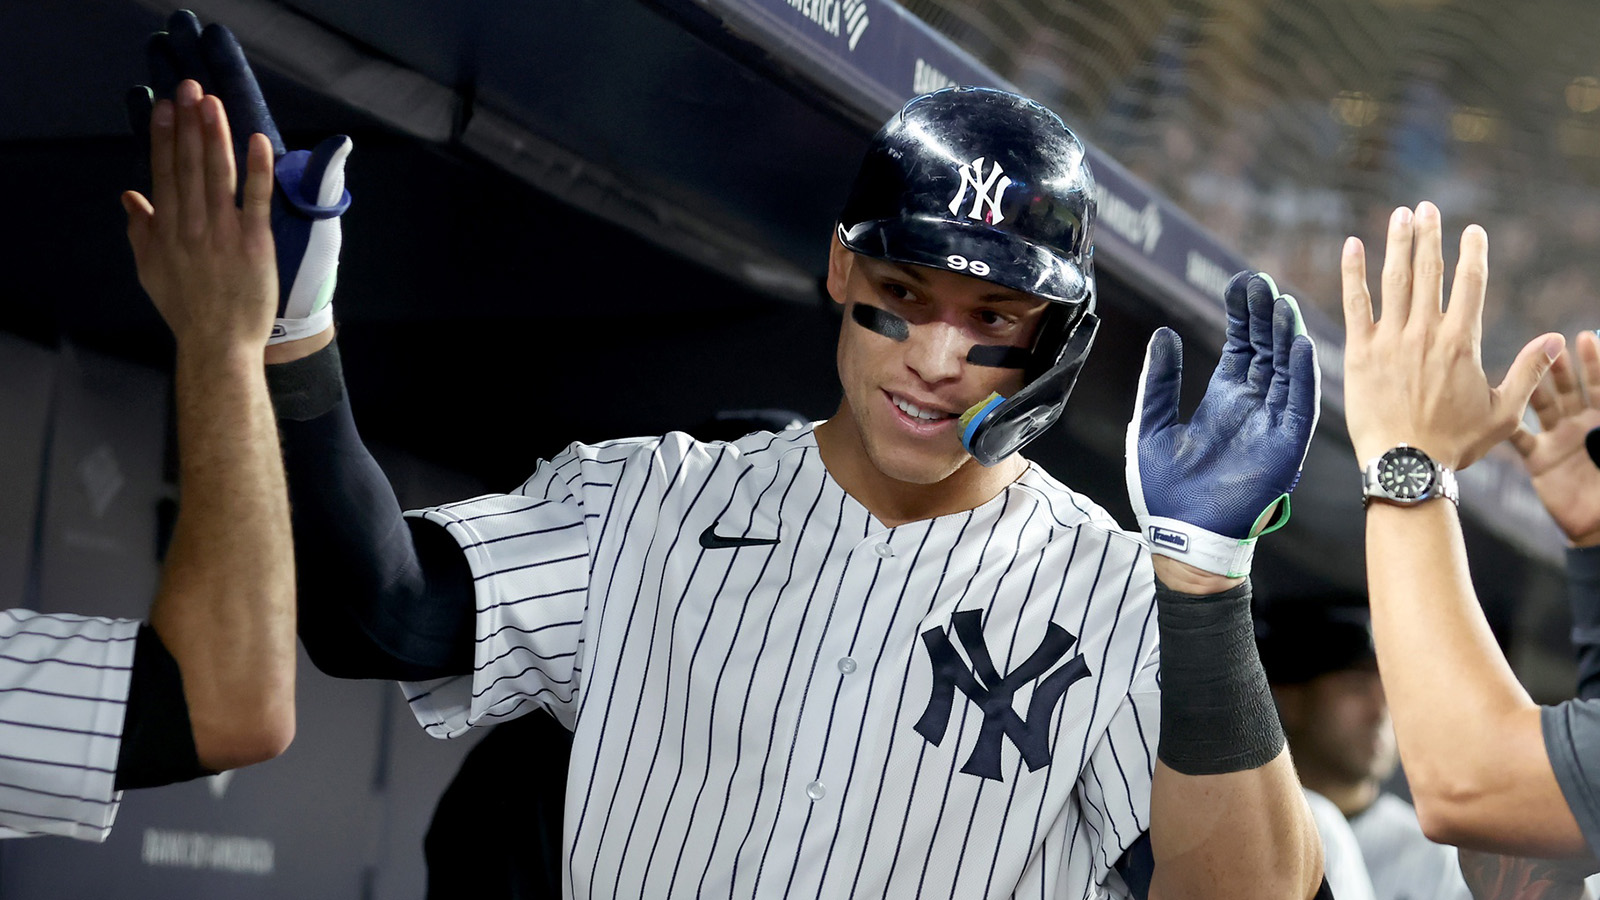 Yankees Star Aaron Judge Teams Up With Topps For A New Set Of Baseball Cards  - NY Sports Day